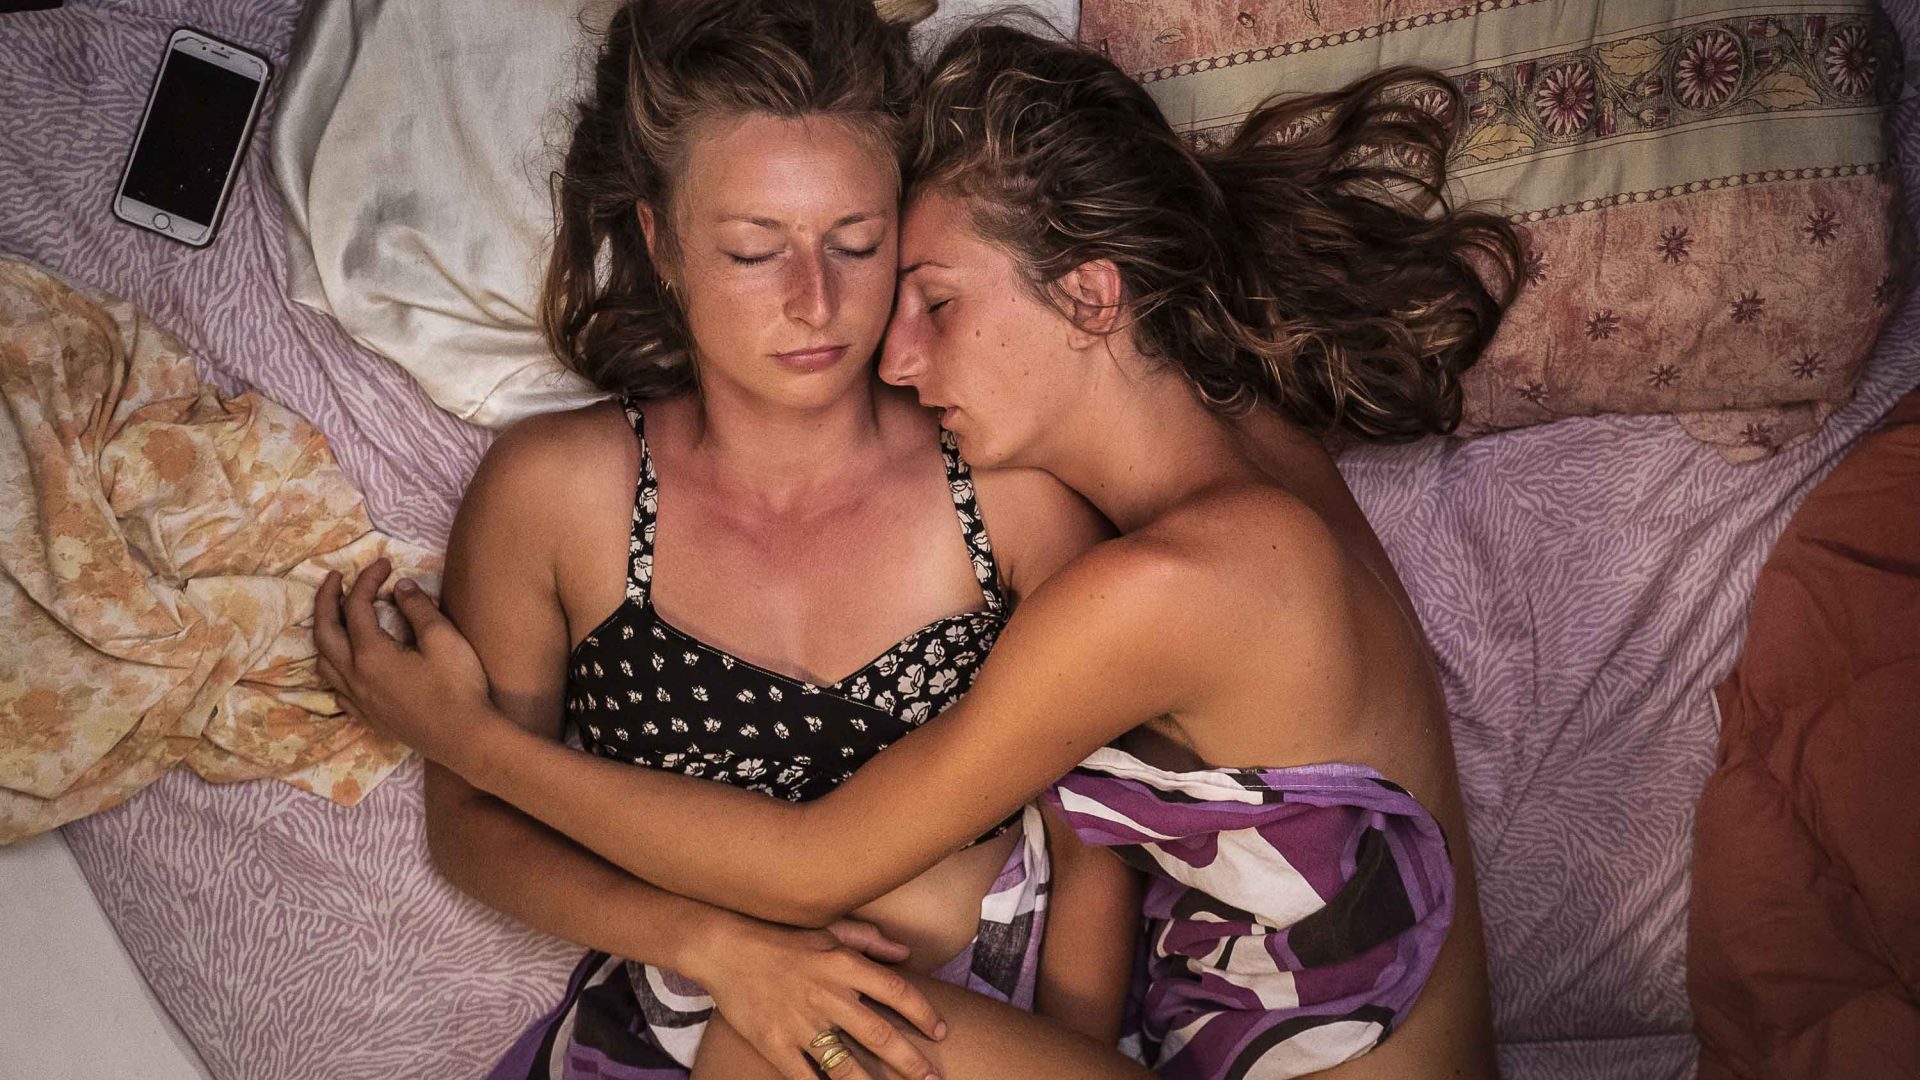 Two women sleep embracing one another.